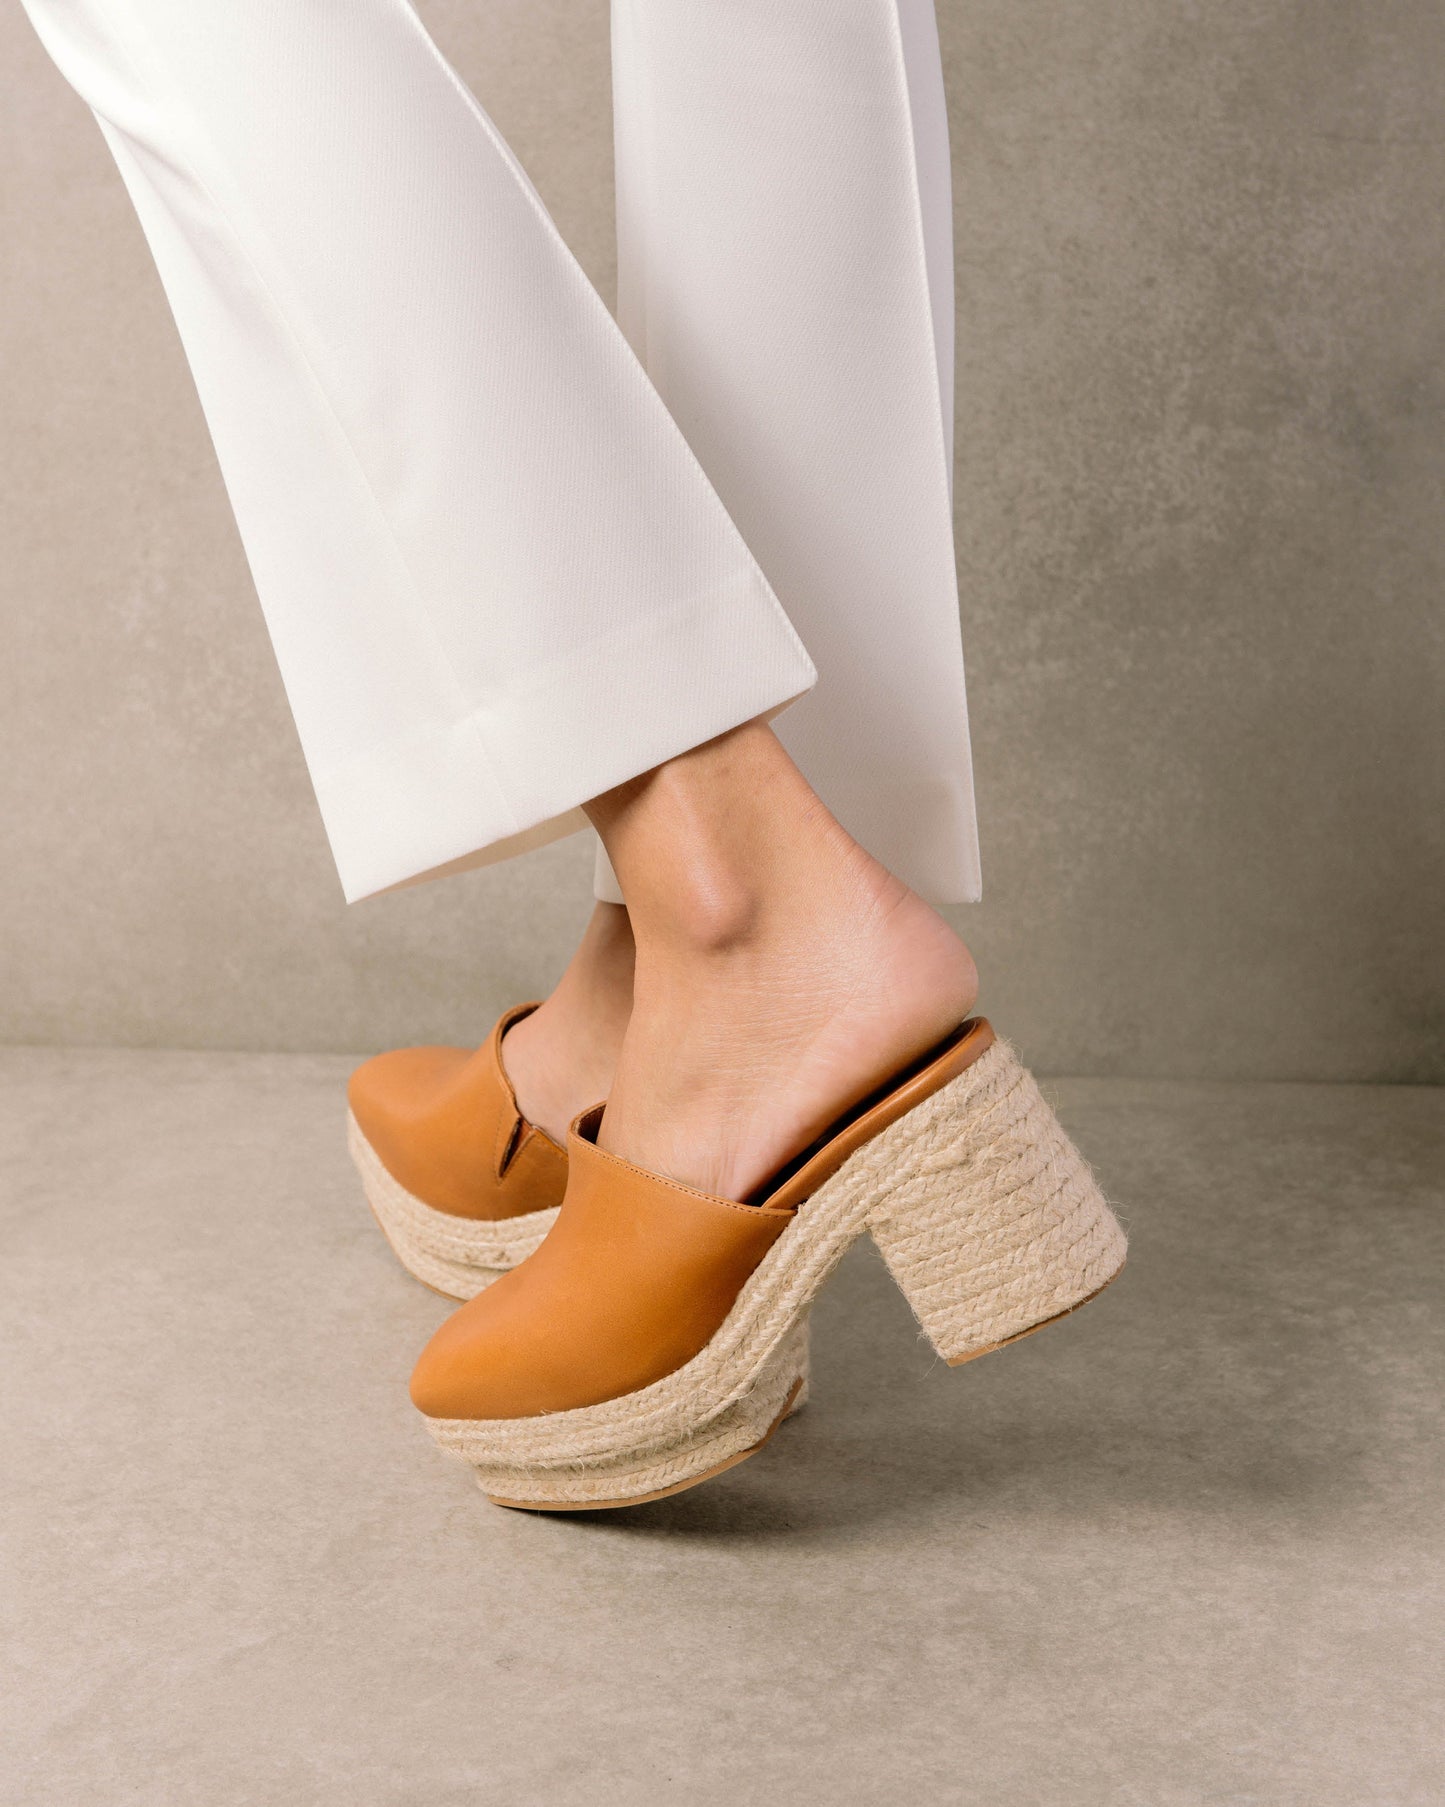 Clog style leather espadrilles with a closed toe and a sultry summer heel. Sustainably made in Spain.